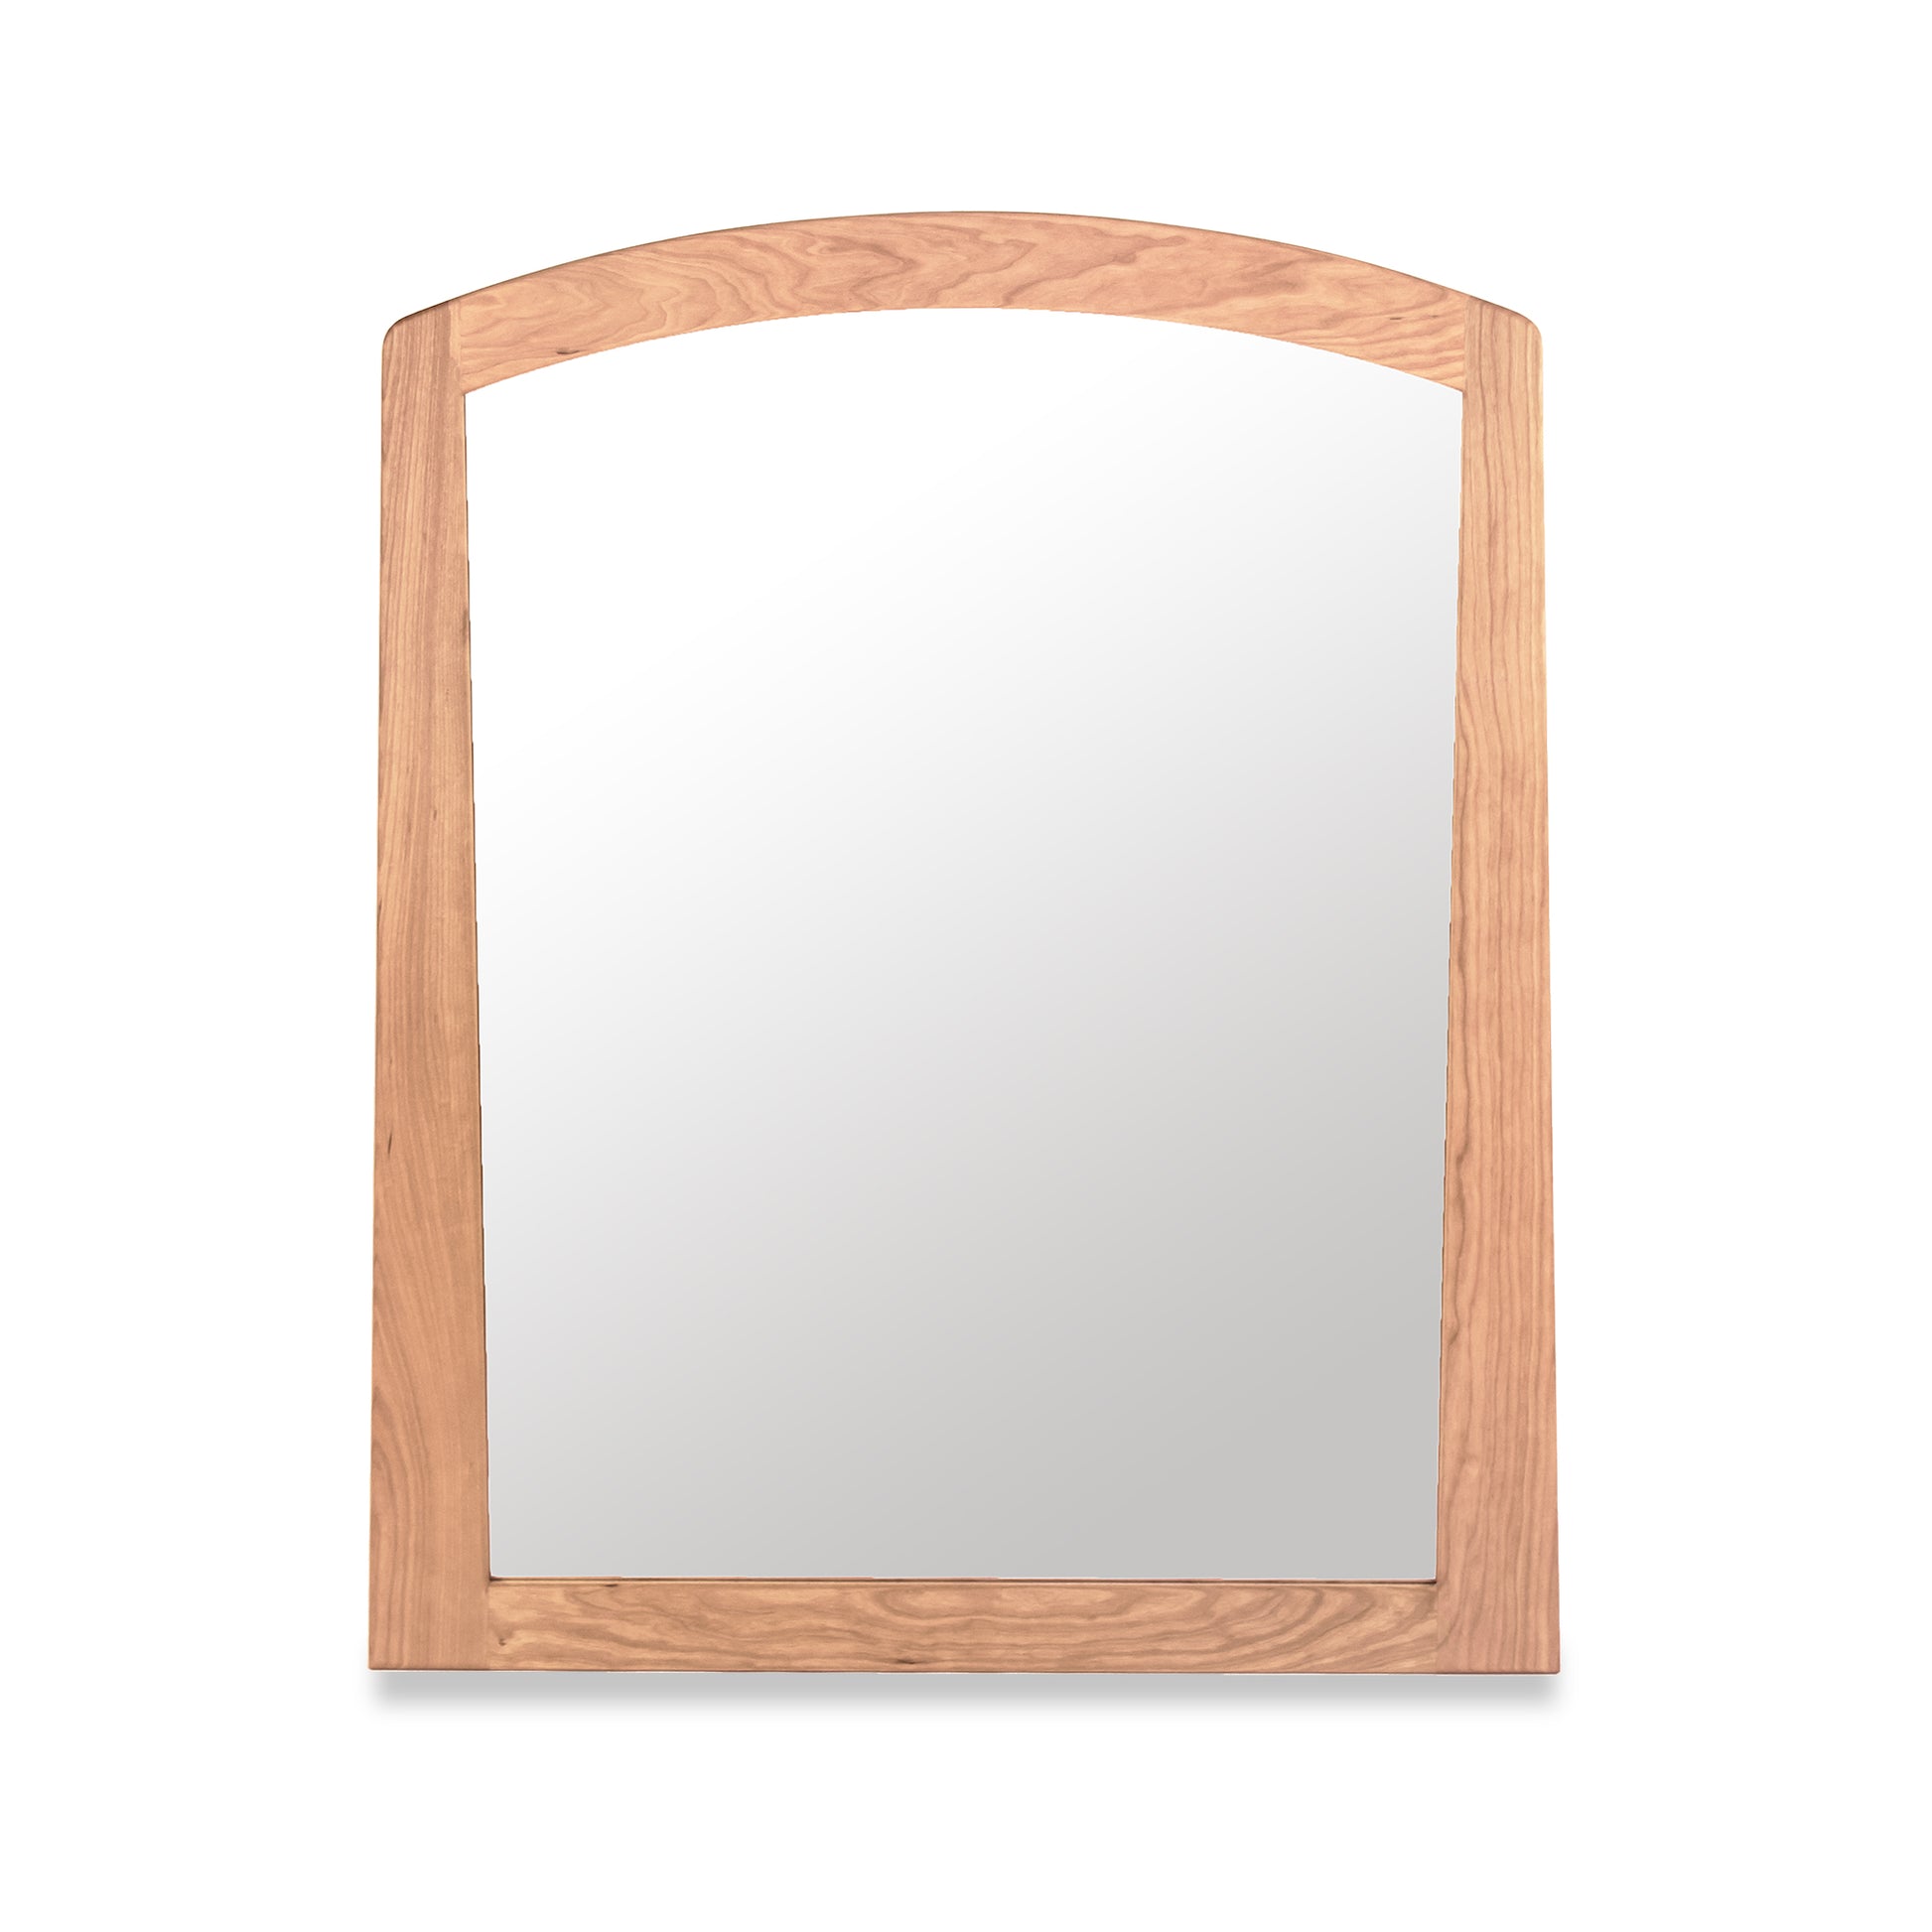 A Cherry Moon Vertical Mirror with an arched top isolated on a white background by Maple Corner Woodworks.